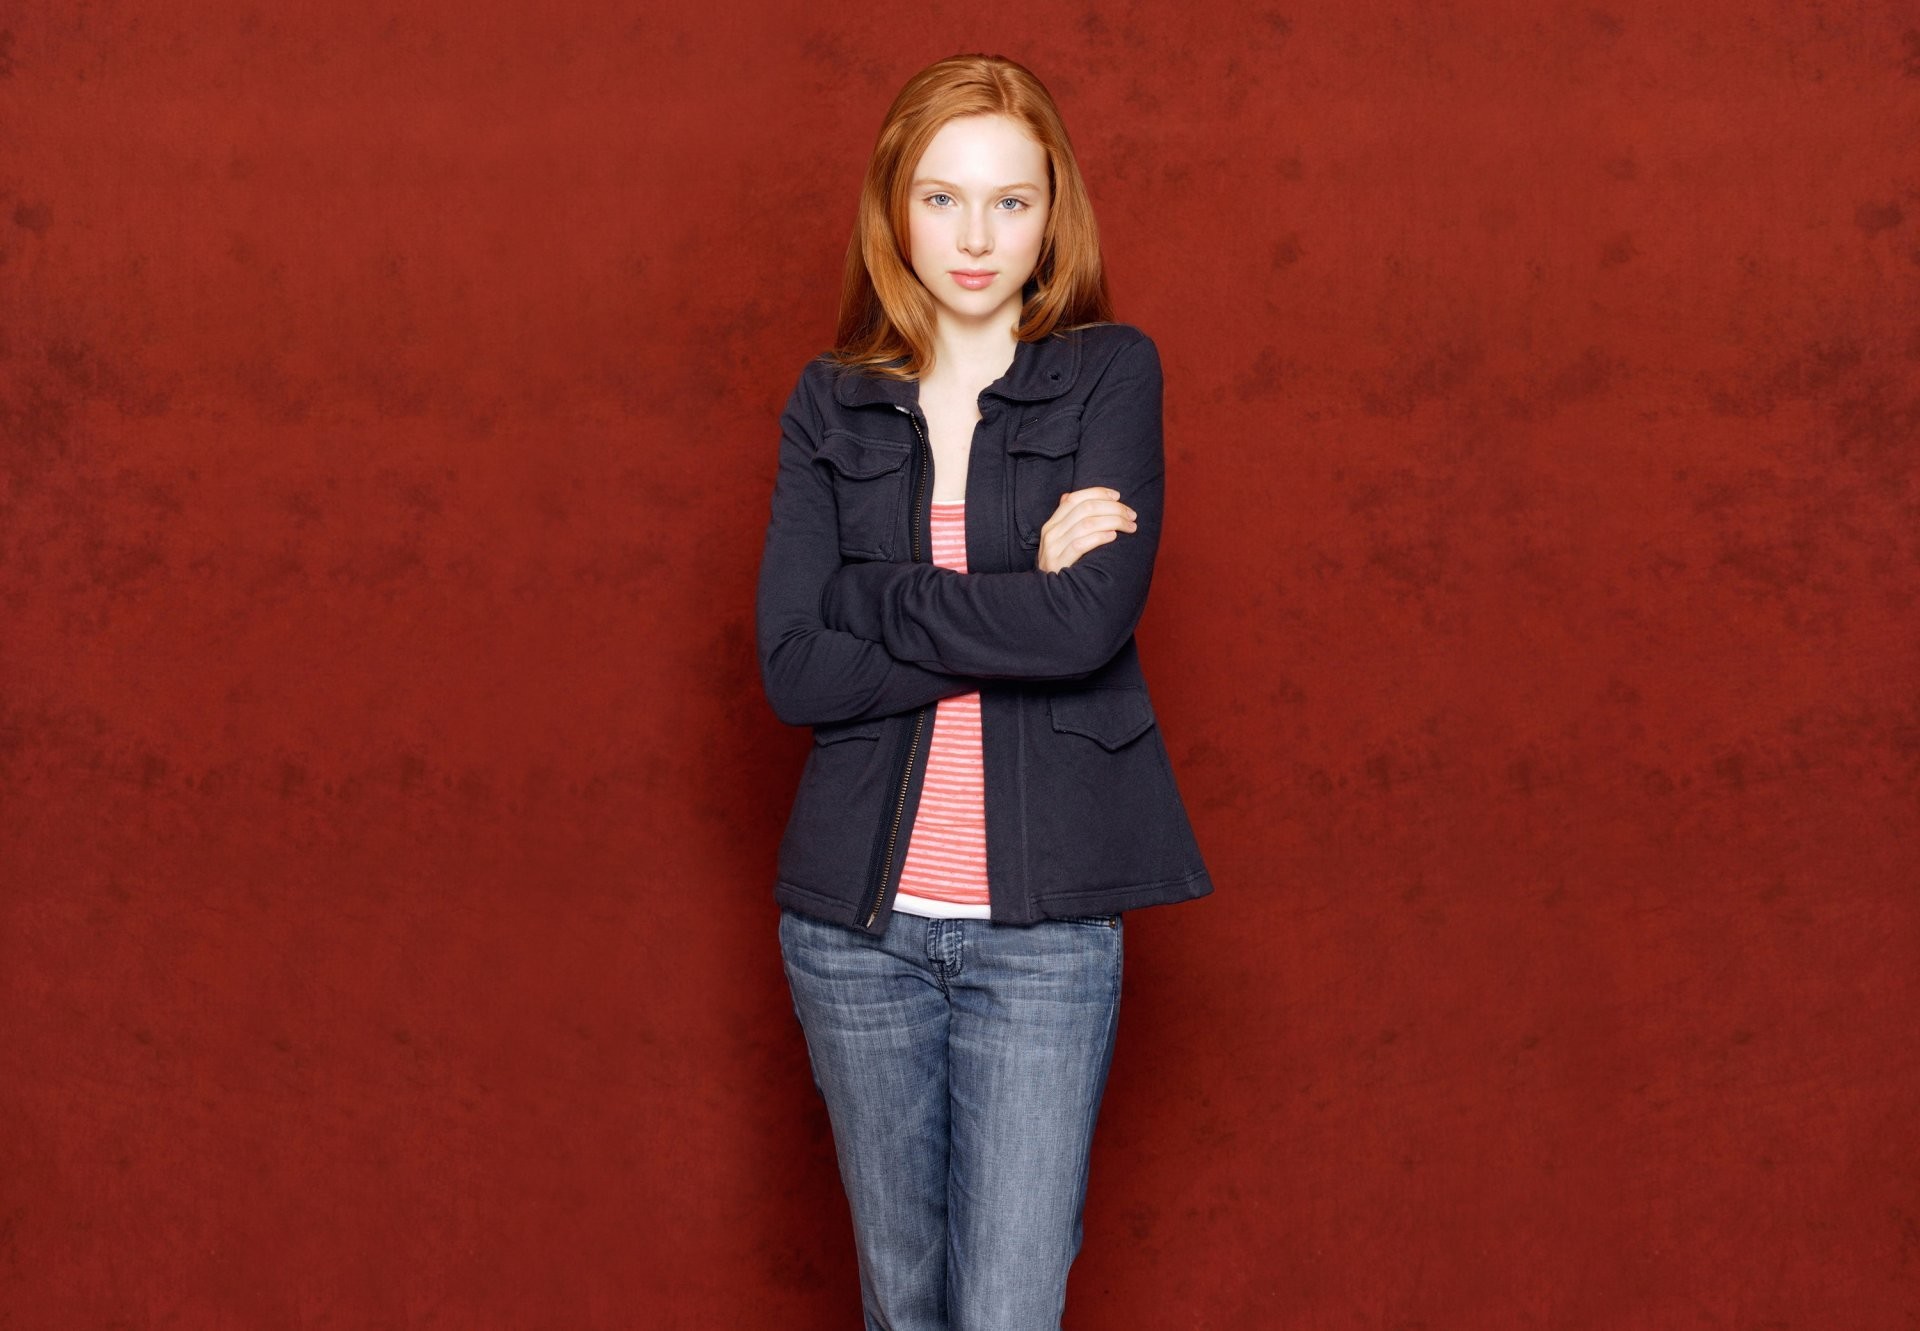 1920x1331 molly c. quinn photoshoot actress background